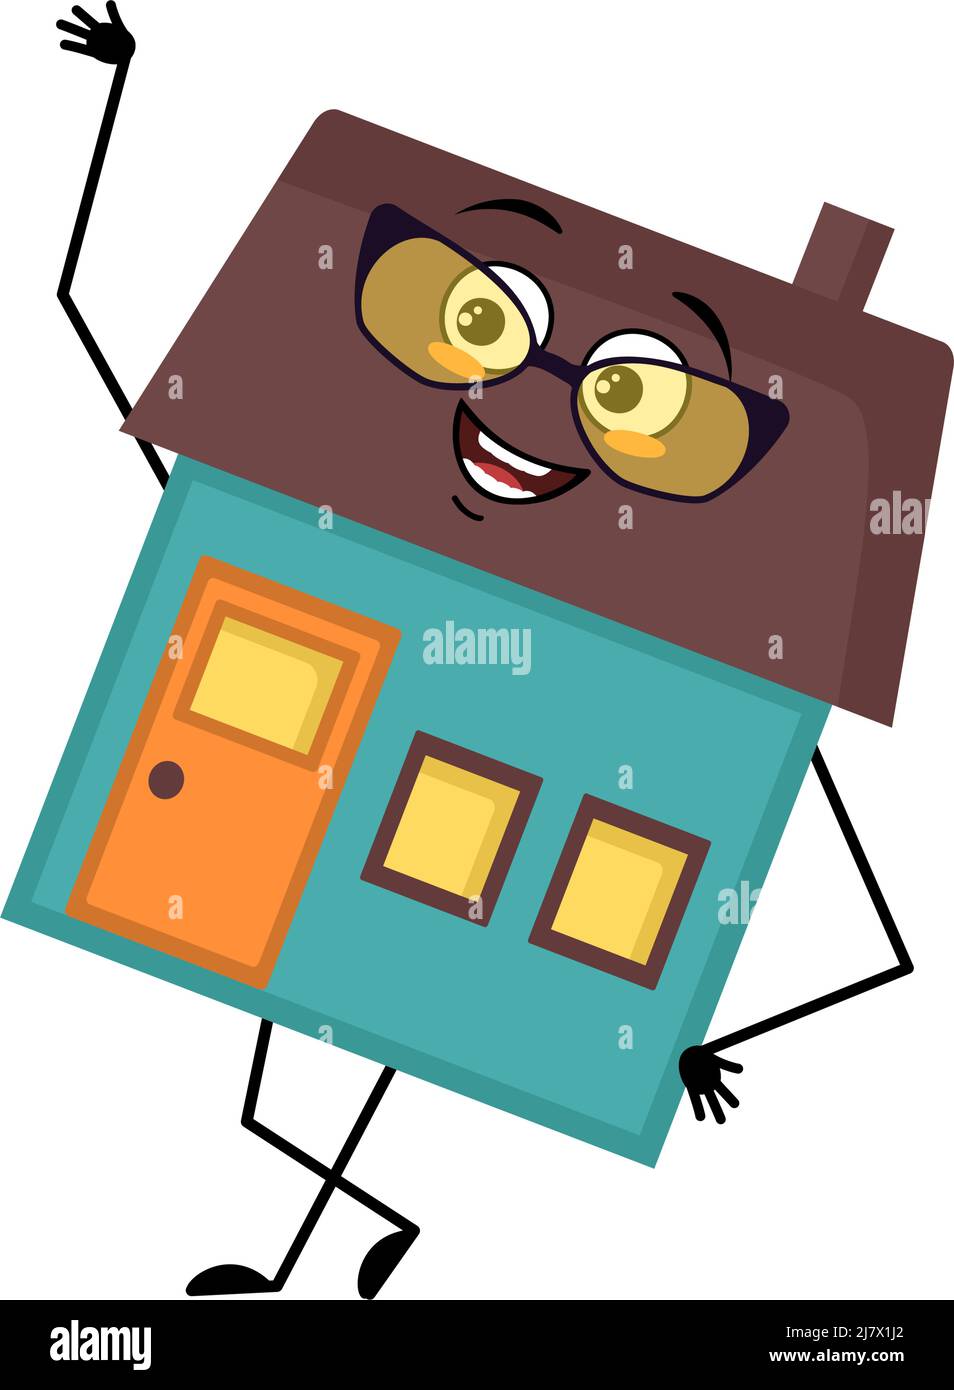 Cute house character with glasses and happy emotion, face, smile eyes, arms and legs. Building man with funny expression, funny cottage. Vector flat illustration Stock Vector